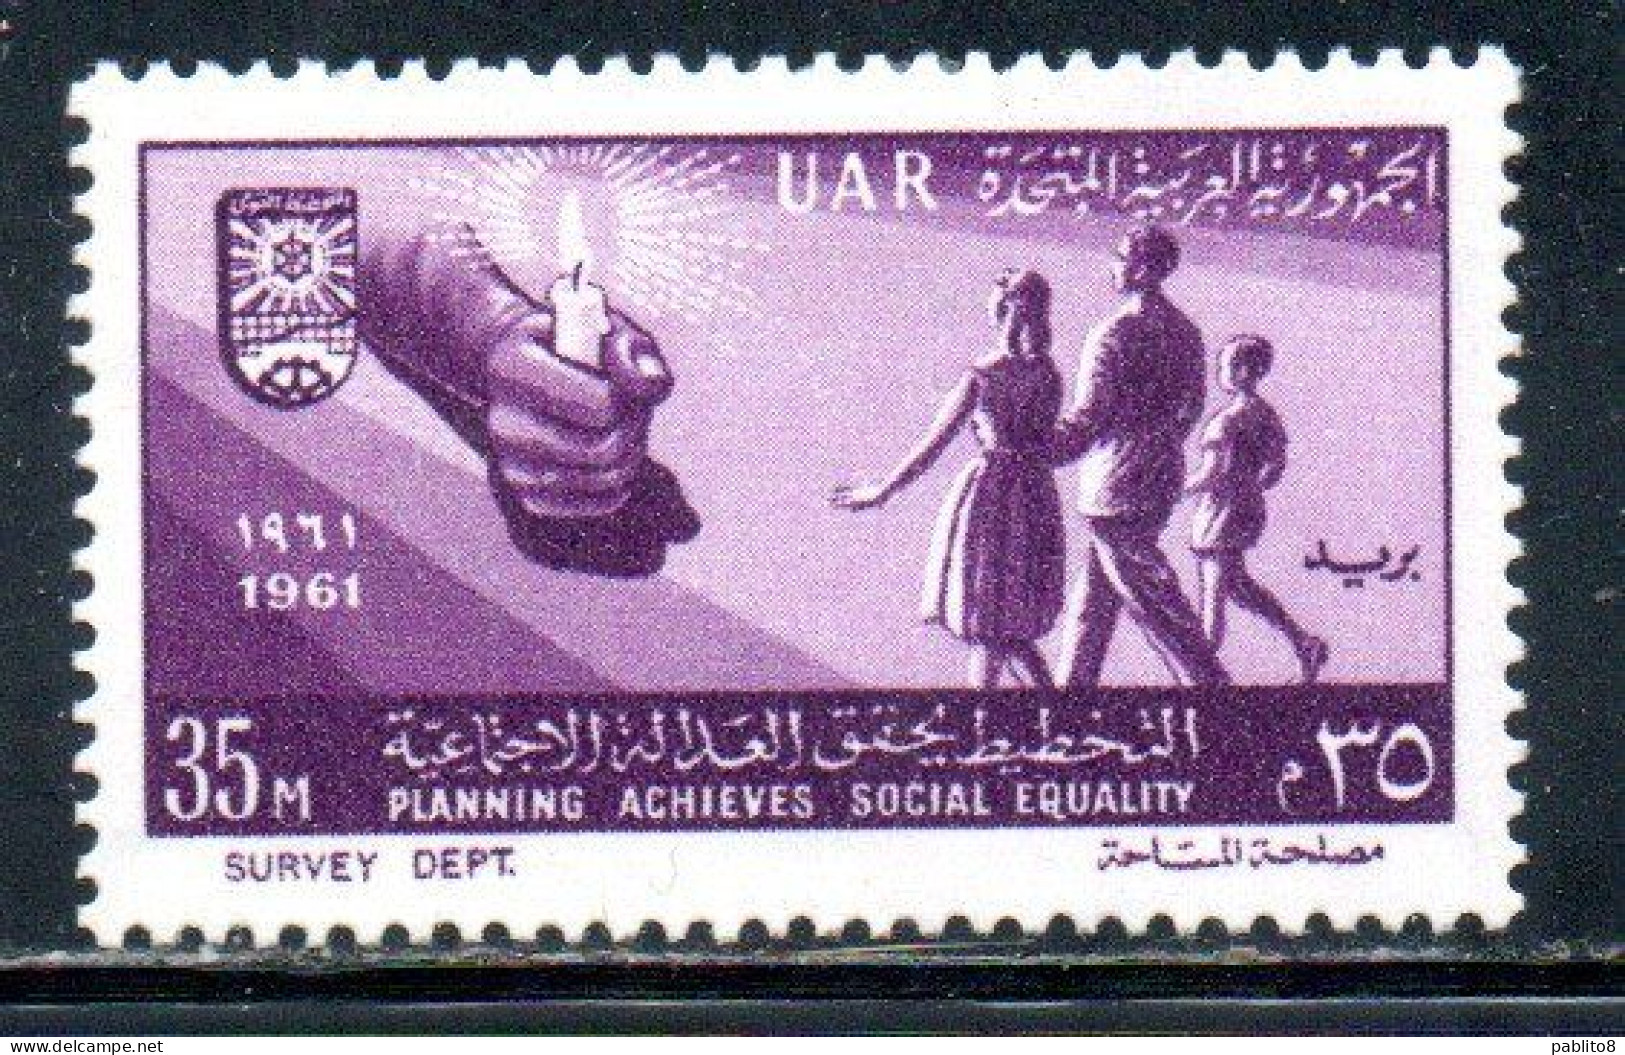 UAR EGYPT EGITTO 1961 PLANNING ACHIEVES SOCIAL EQUALITY HAND HOLDING CANDLE AND FAMILY 35m MH - Neufs